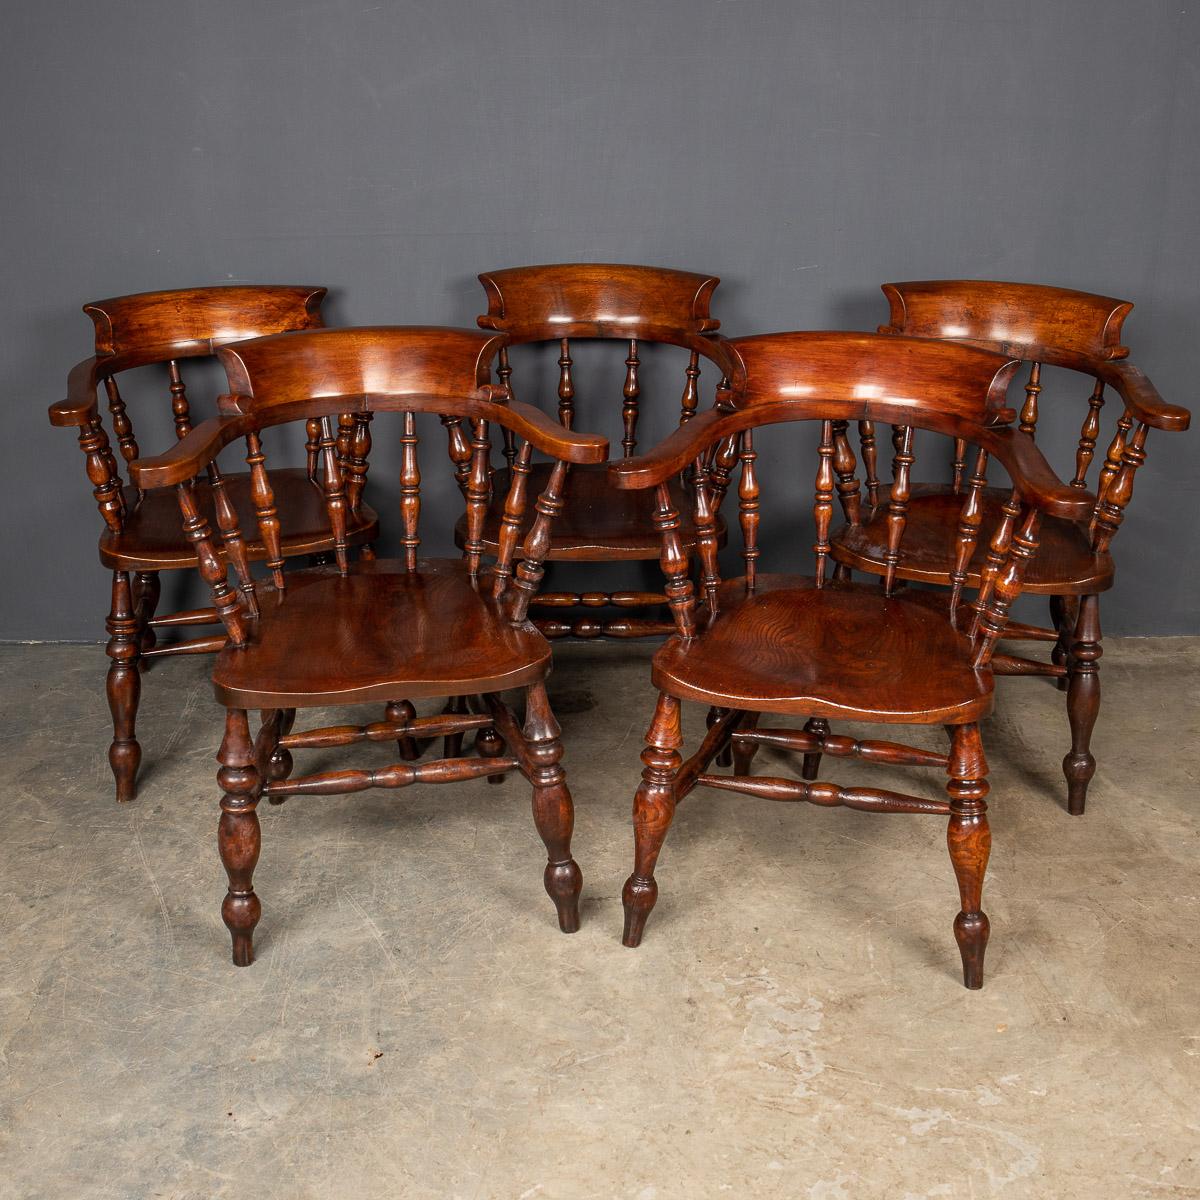 Antique 19th century Victorian set of five elm smokers bow back chairs also known as captains chairs, with beautifully turned legs and spindles.

Condition
In good condition - wear as expected.

Size
Width: 68cm
Depth: 50cm
Height: